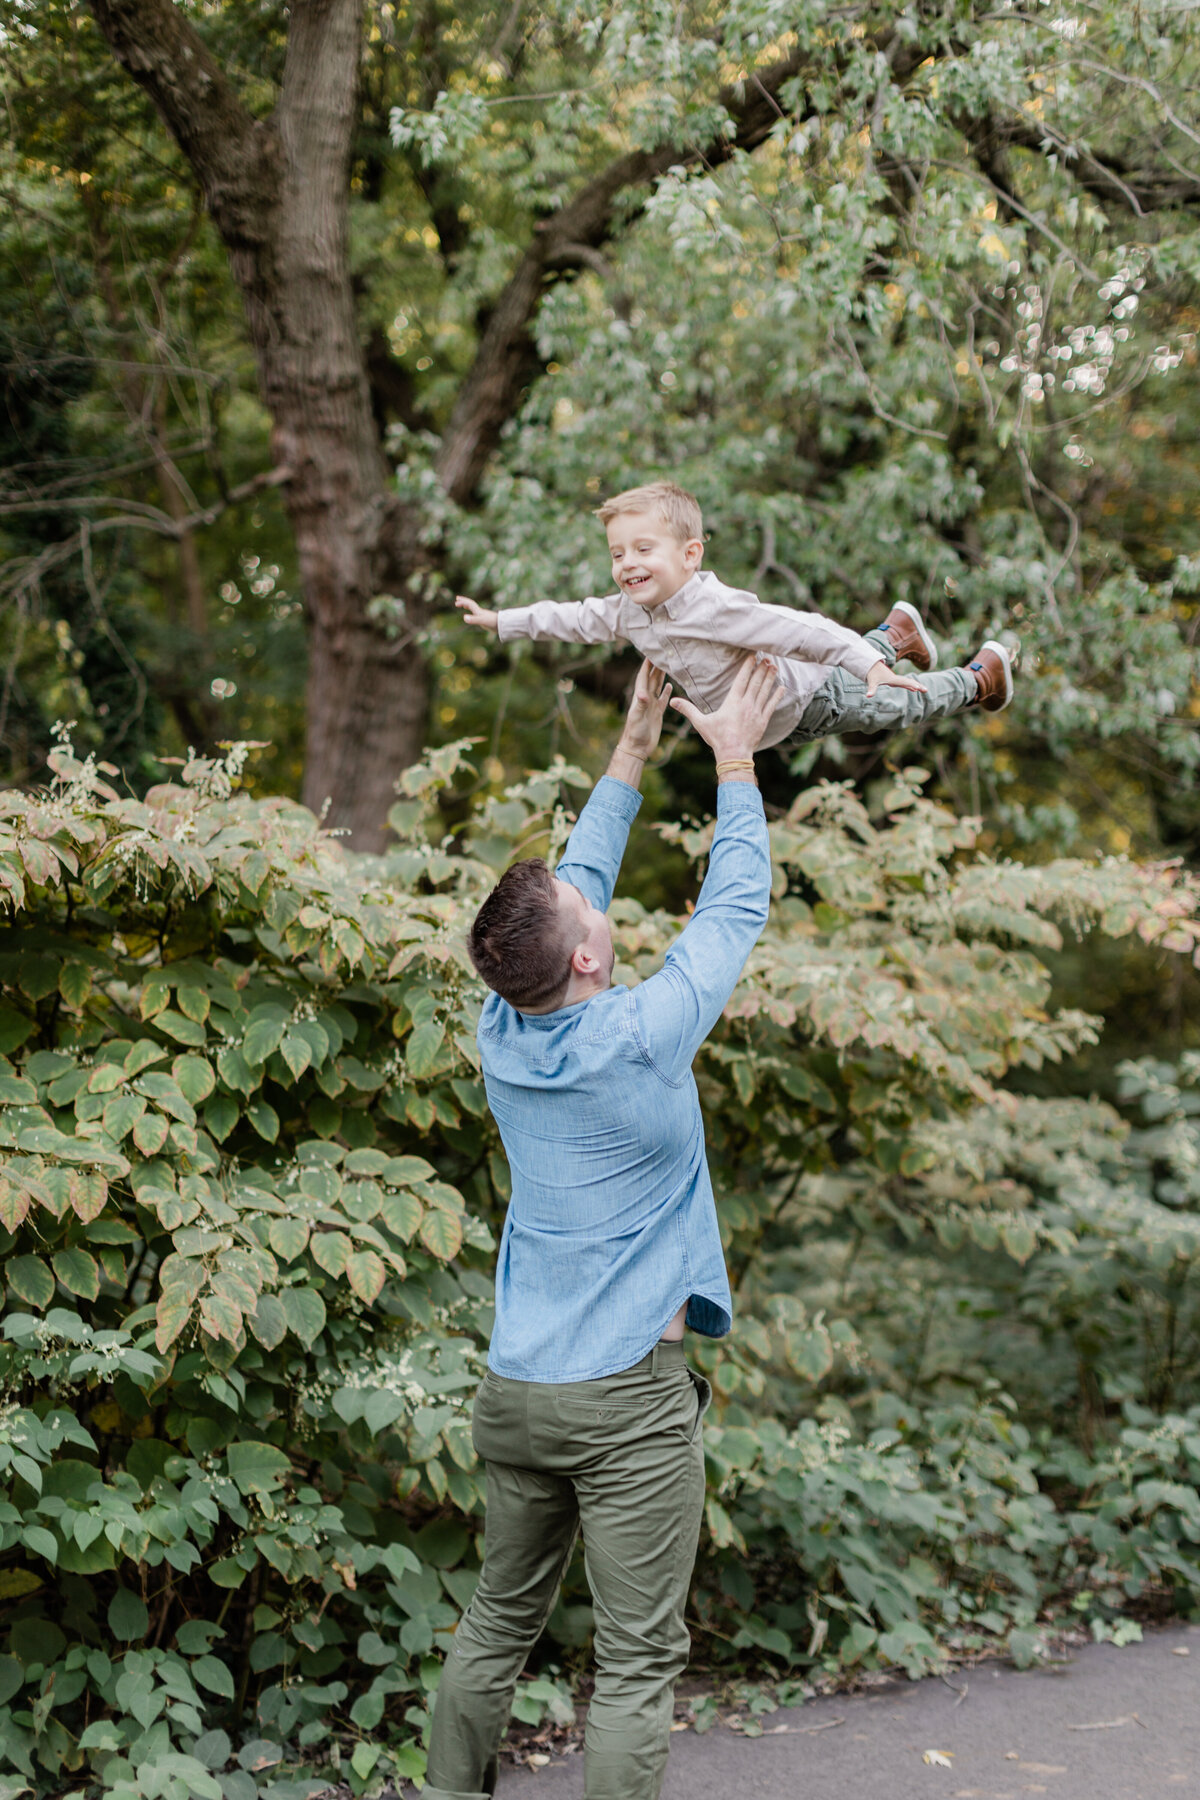 Dad tossing his son in the air in a lush green park photographed by Family Photographer South Jersey Tara Federico